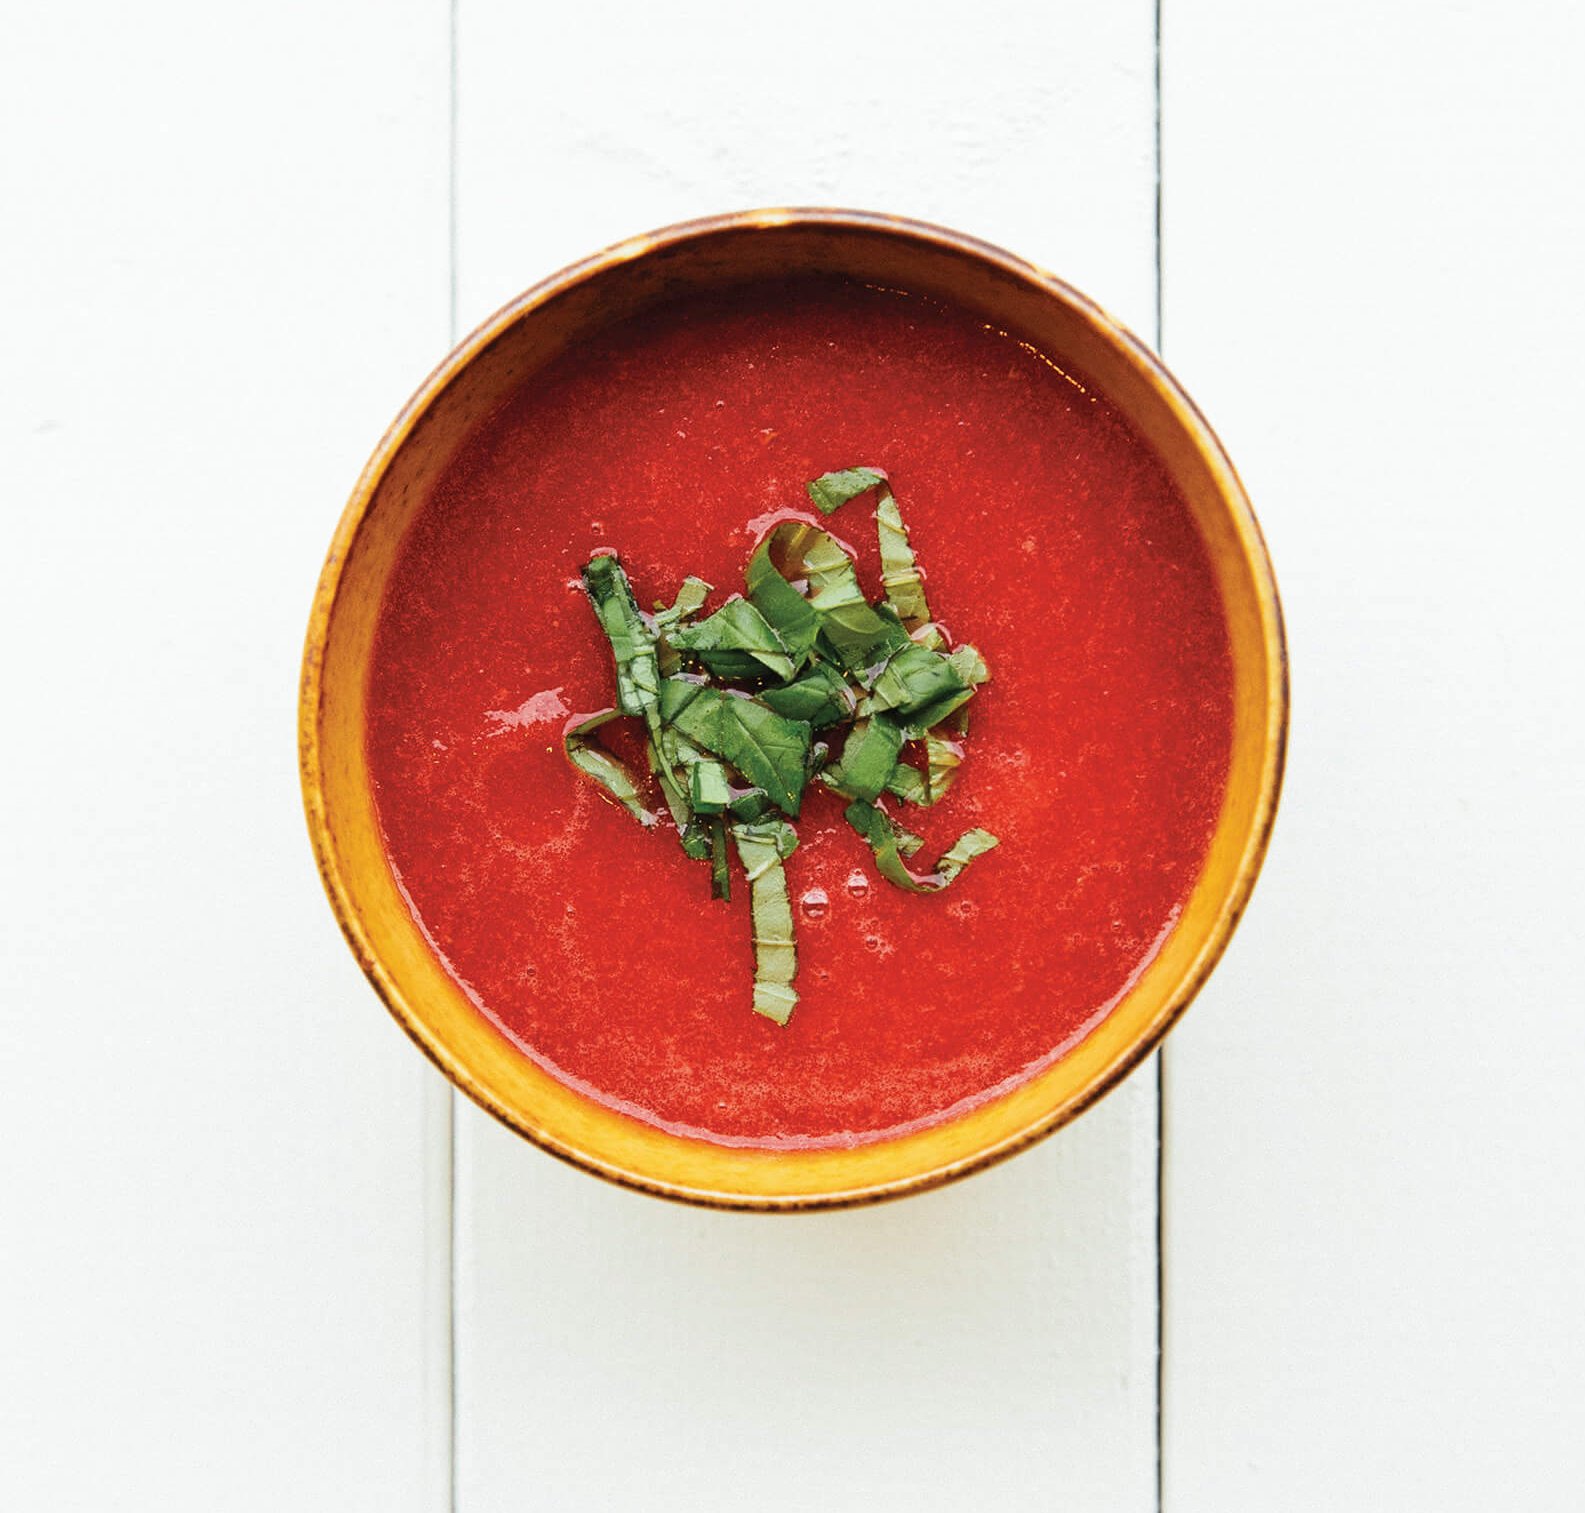 A small bowl of bright red soup with a lettuce garnish on bright white planks